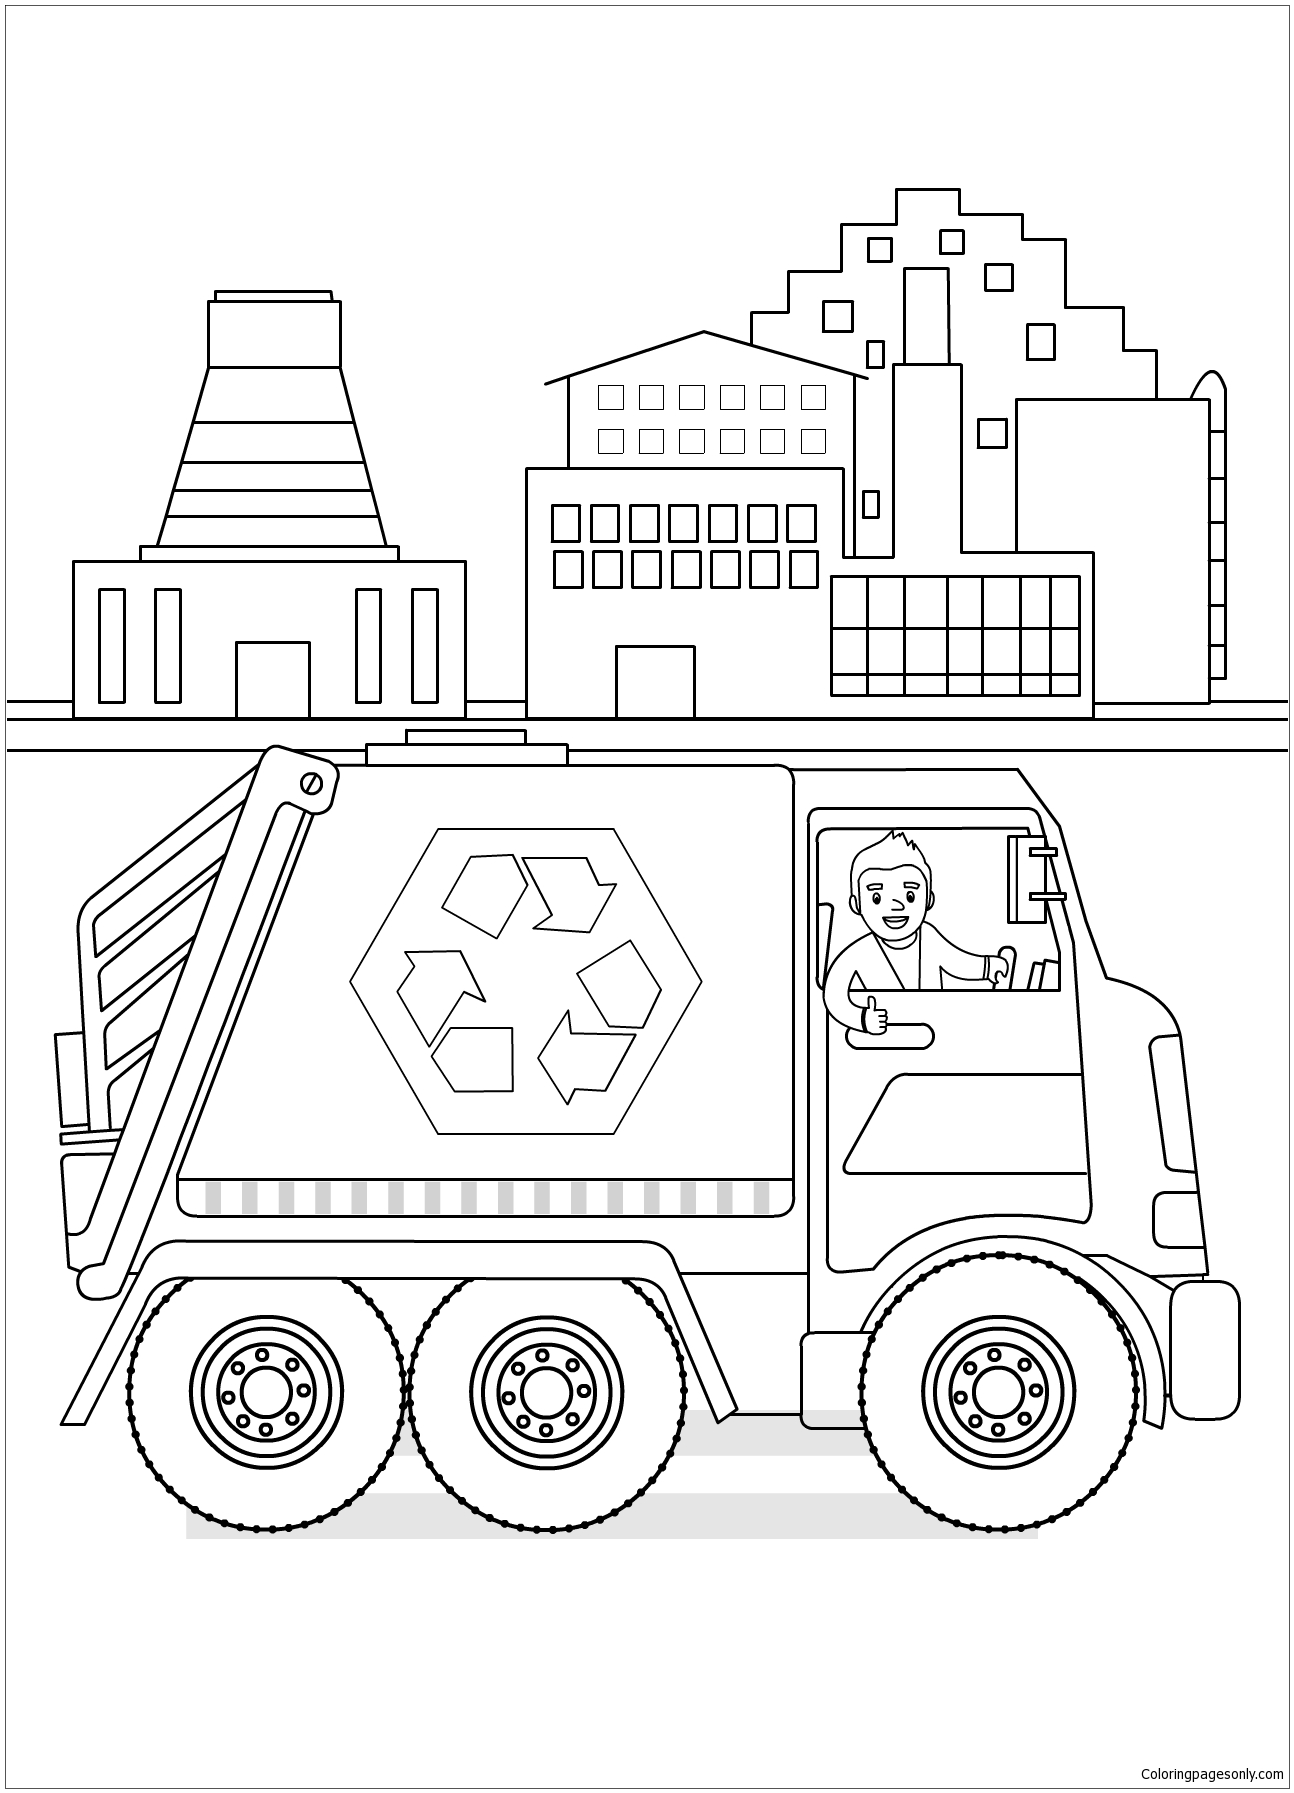 Recycling Diary Coloring Pages